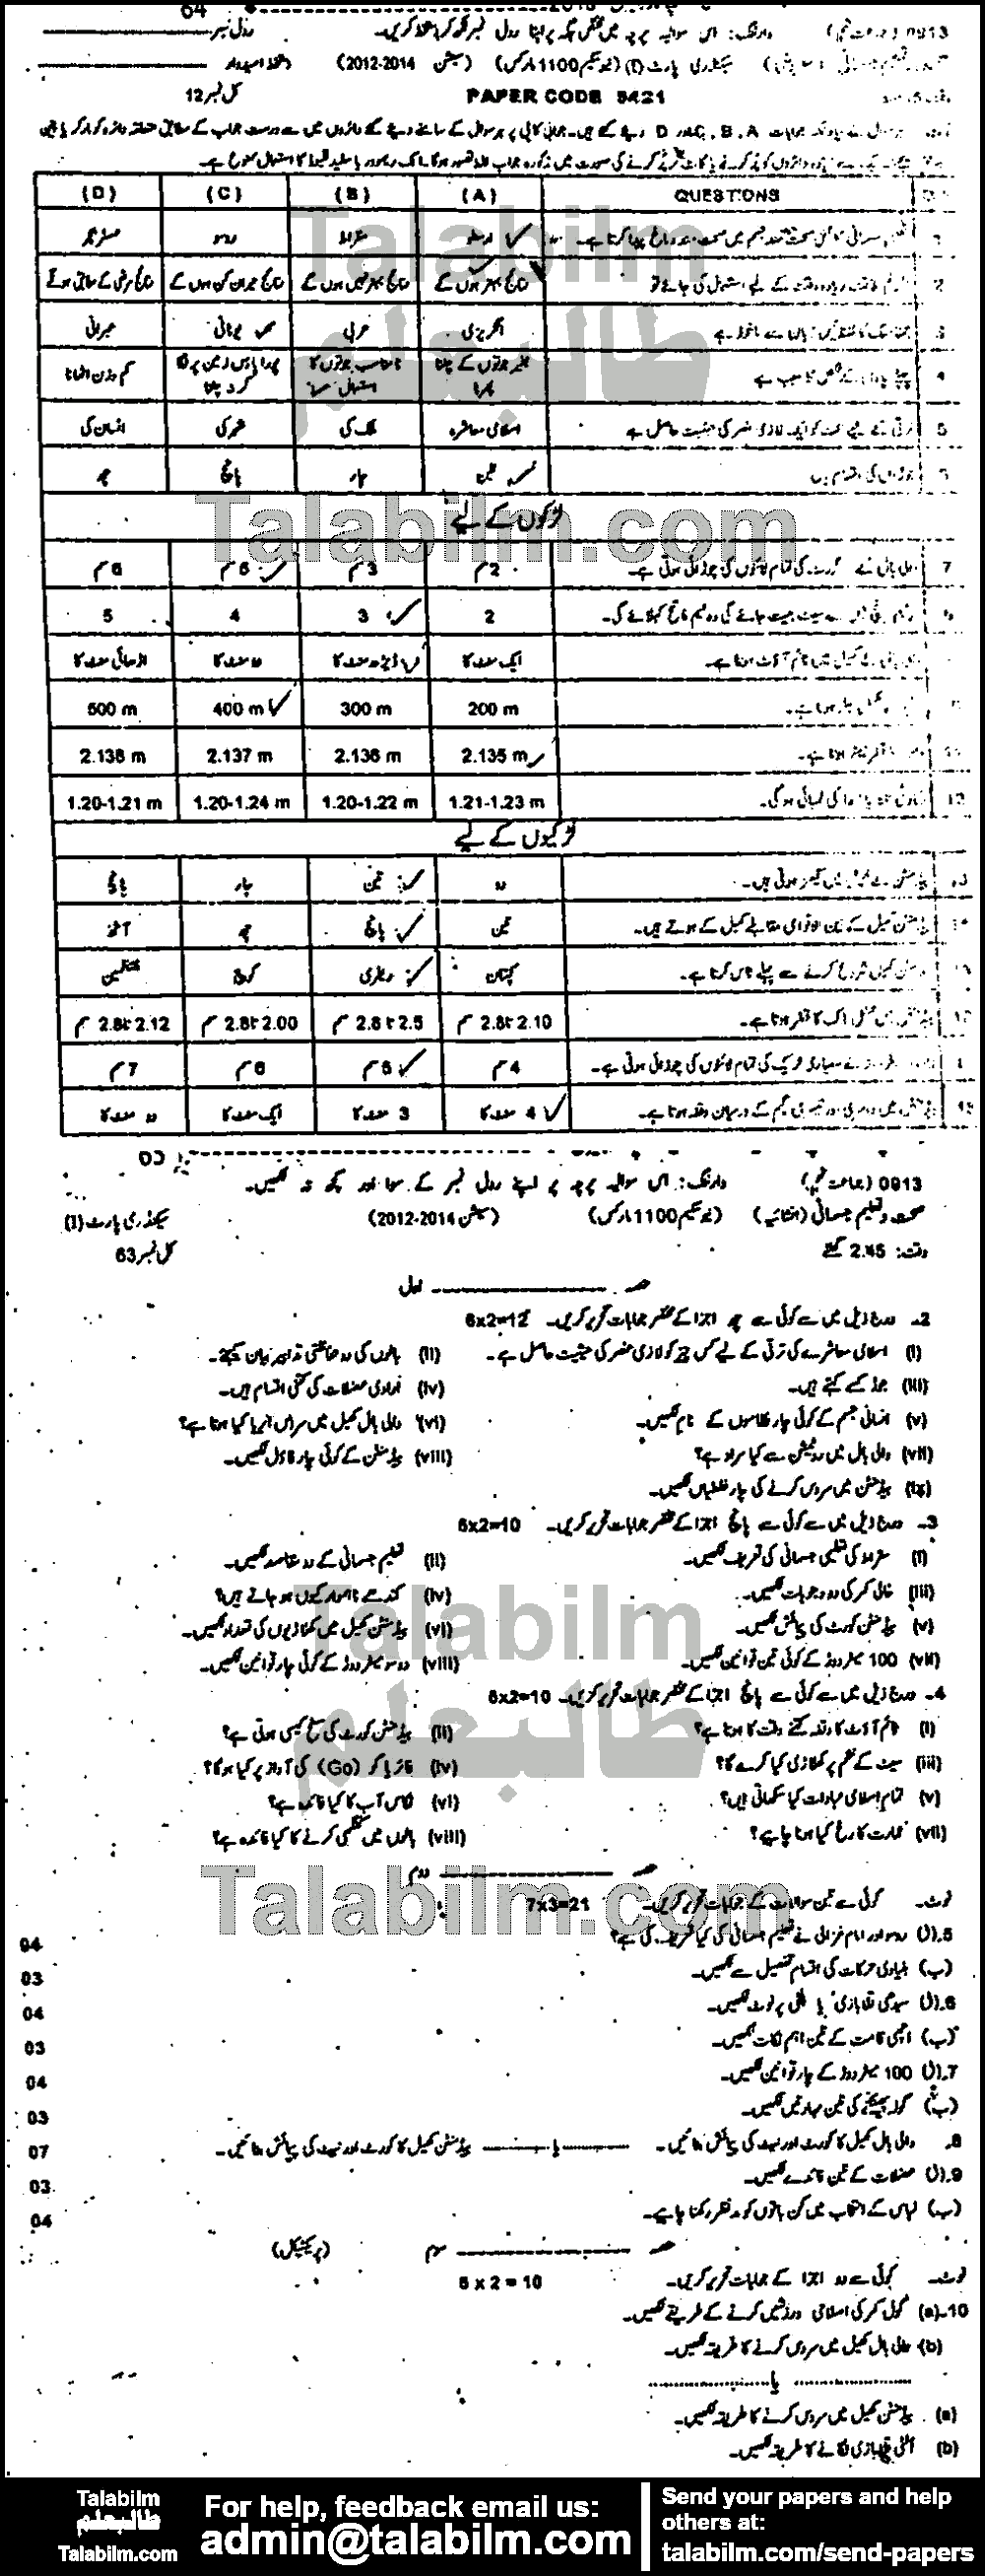 Health And Physical Education 0 past paper for Urdu Medium 2013 Group-I